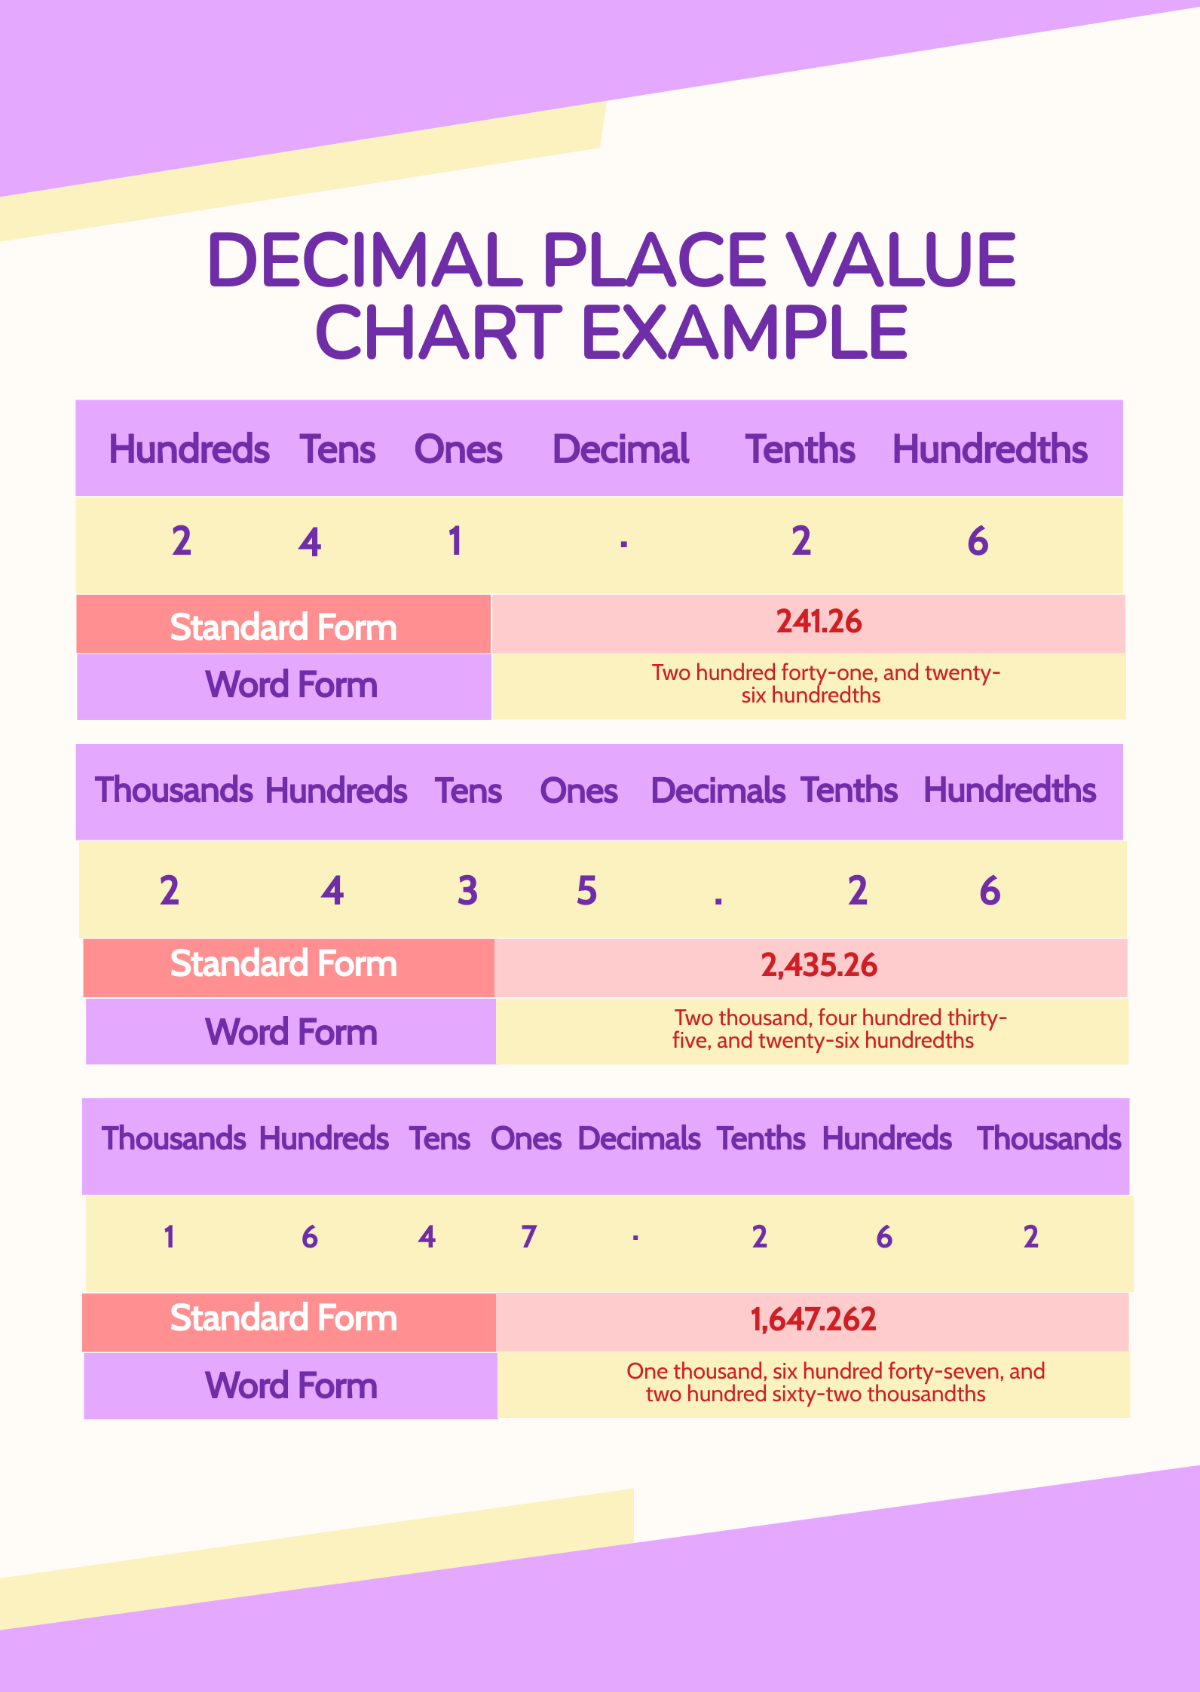 Decimal Place Value Chart Example